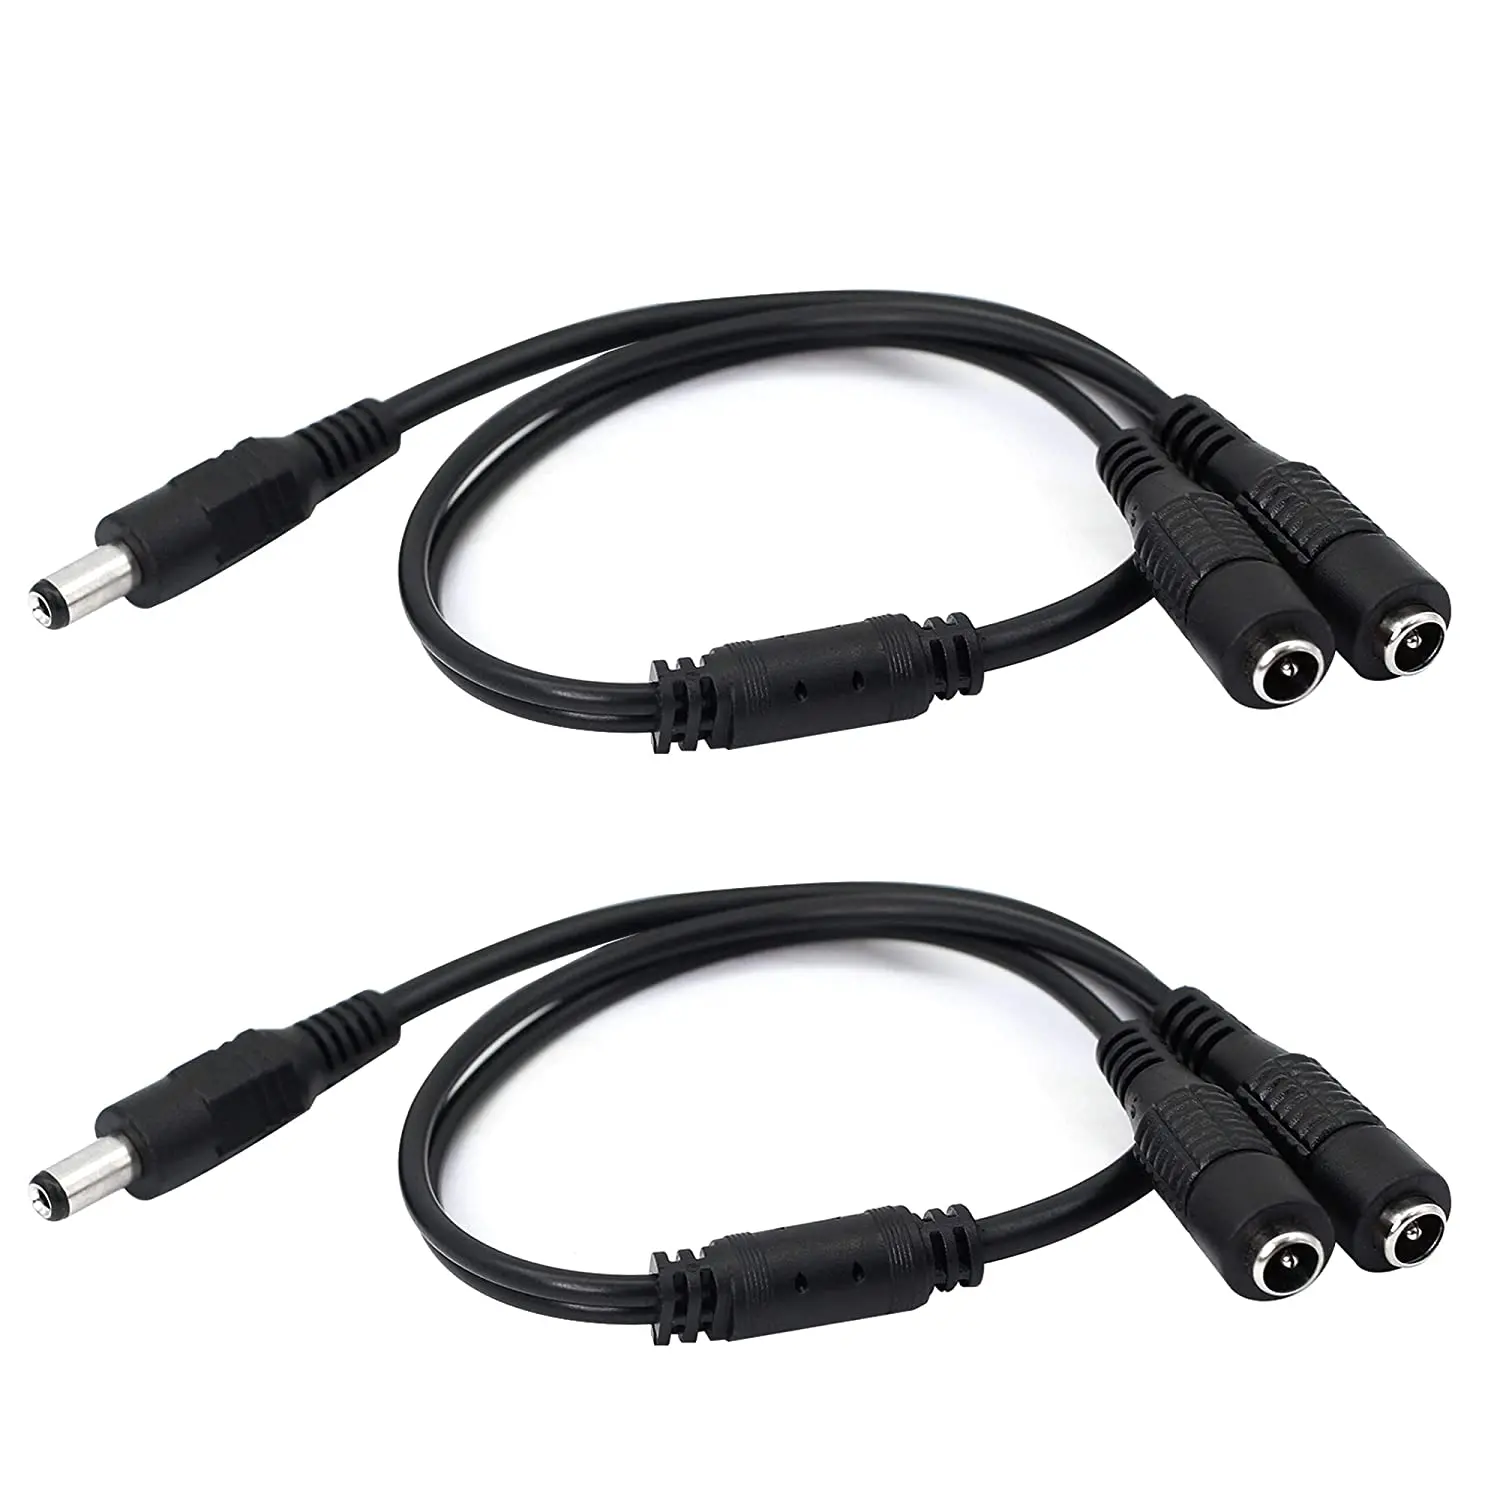 Way Female to Male Splitter Cable DC Power Cord For CCTV Camera LED Strip Light 